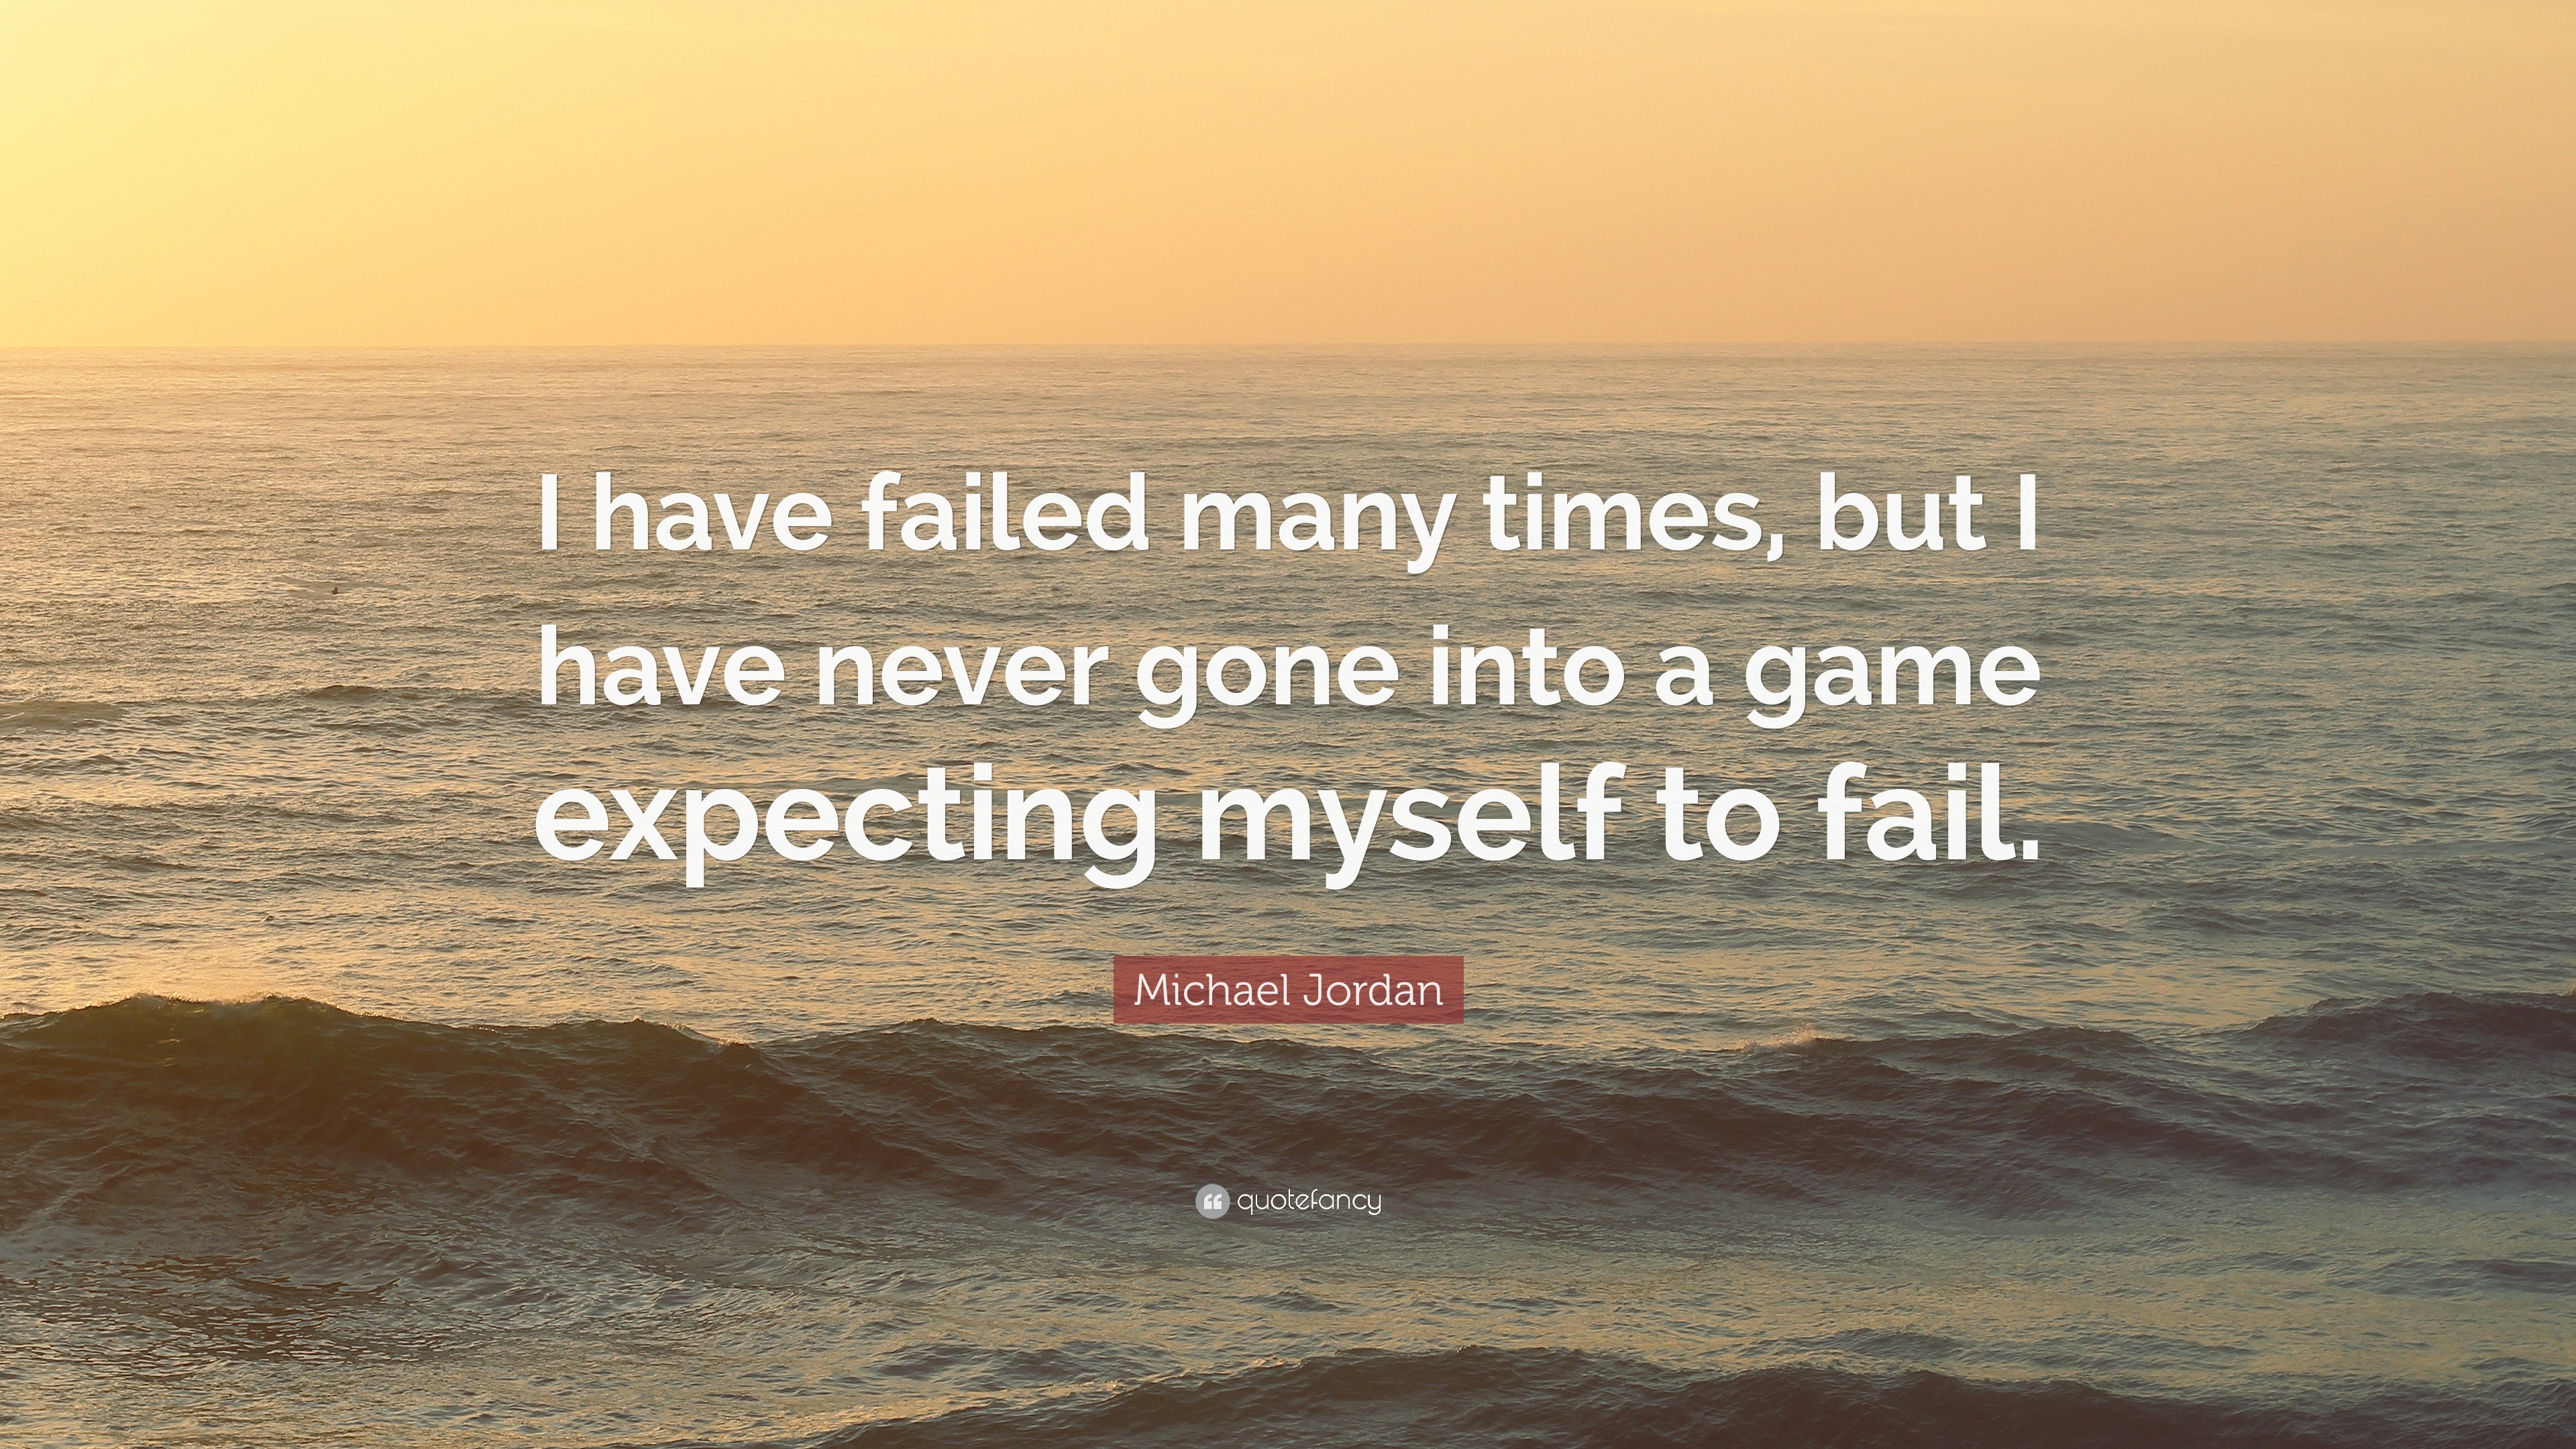 Michael Jordan Quote: “I have failed many times, but I have never gone